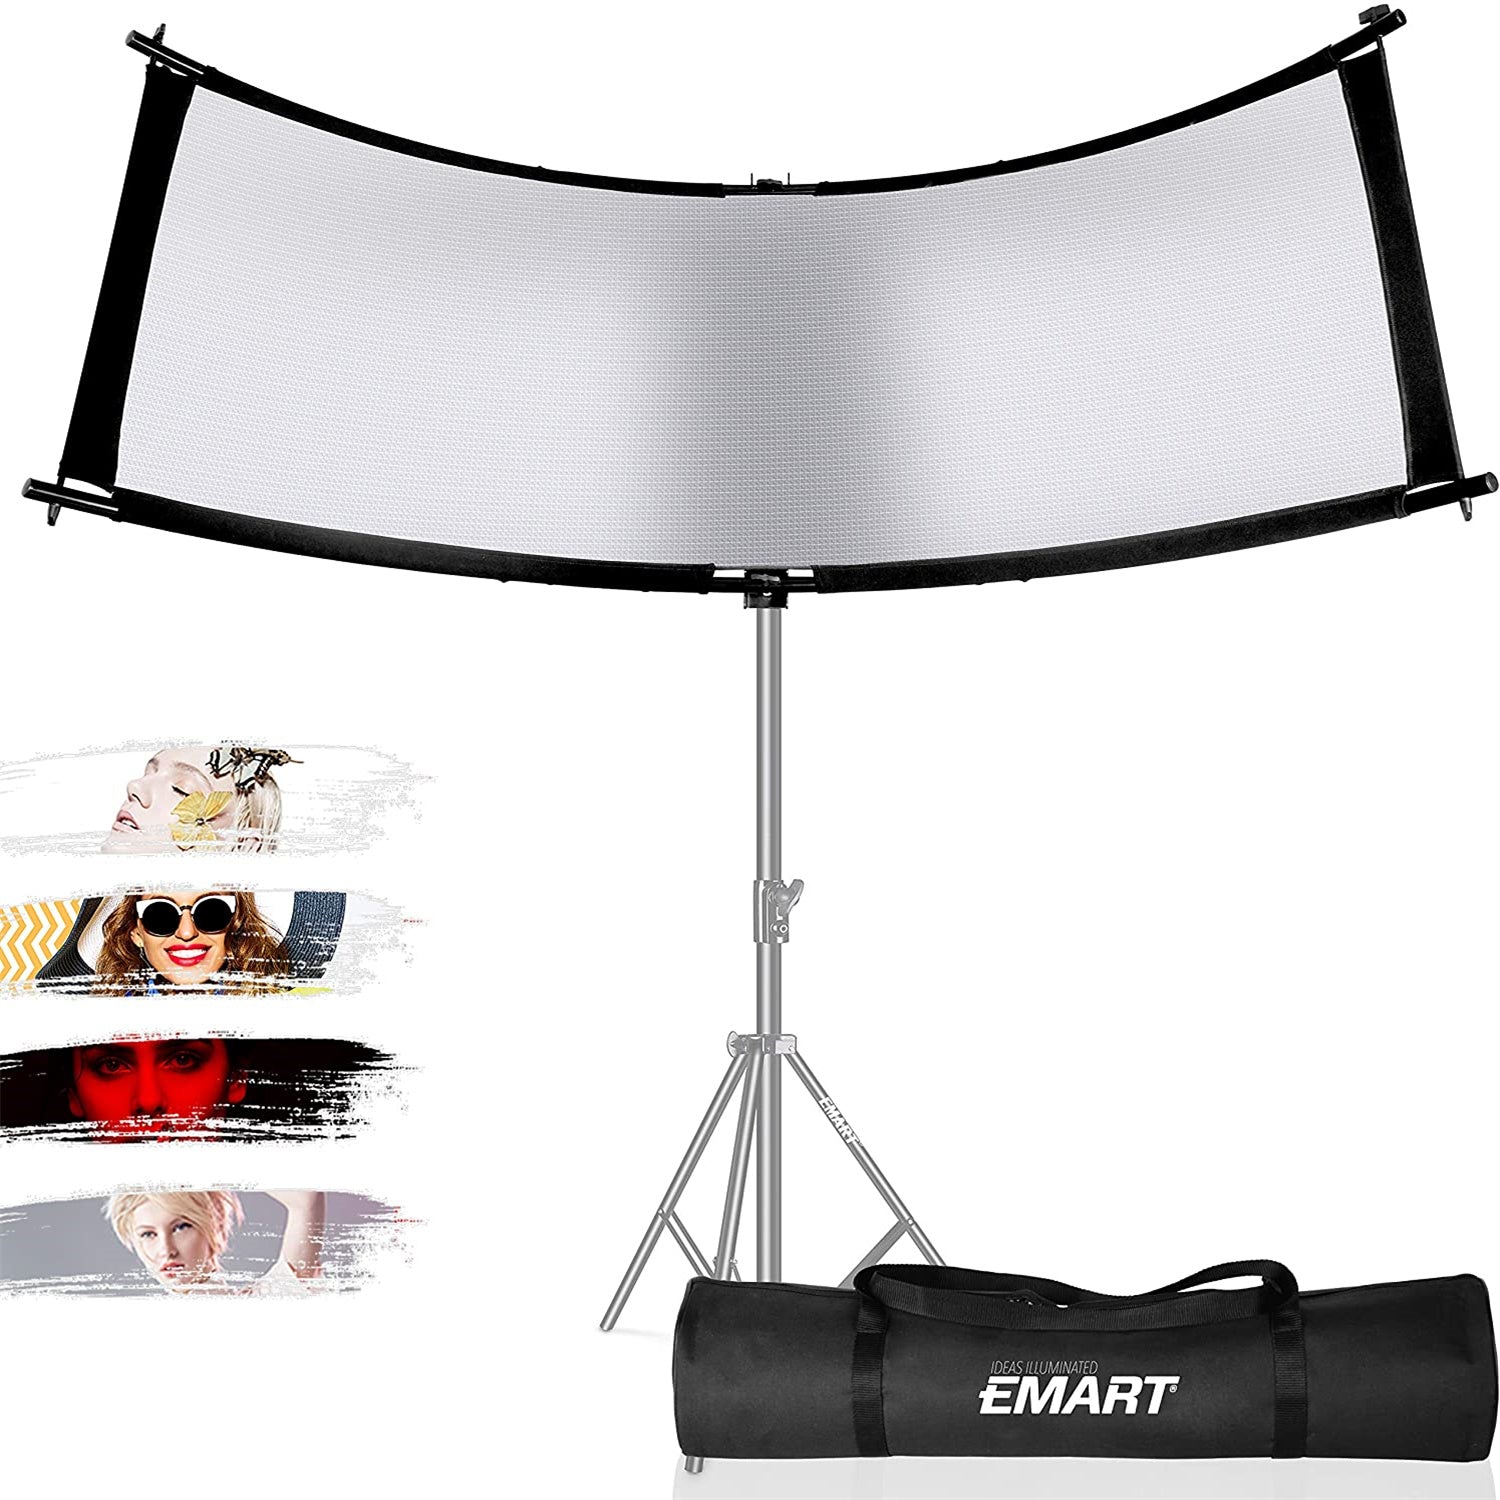 Photography Arc-light Curved Clamshell Lighting Diffuser